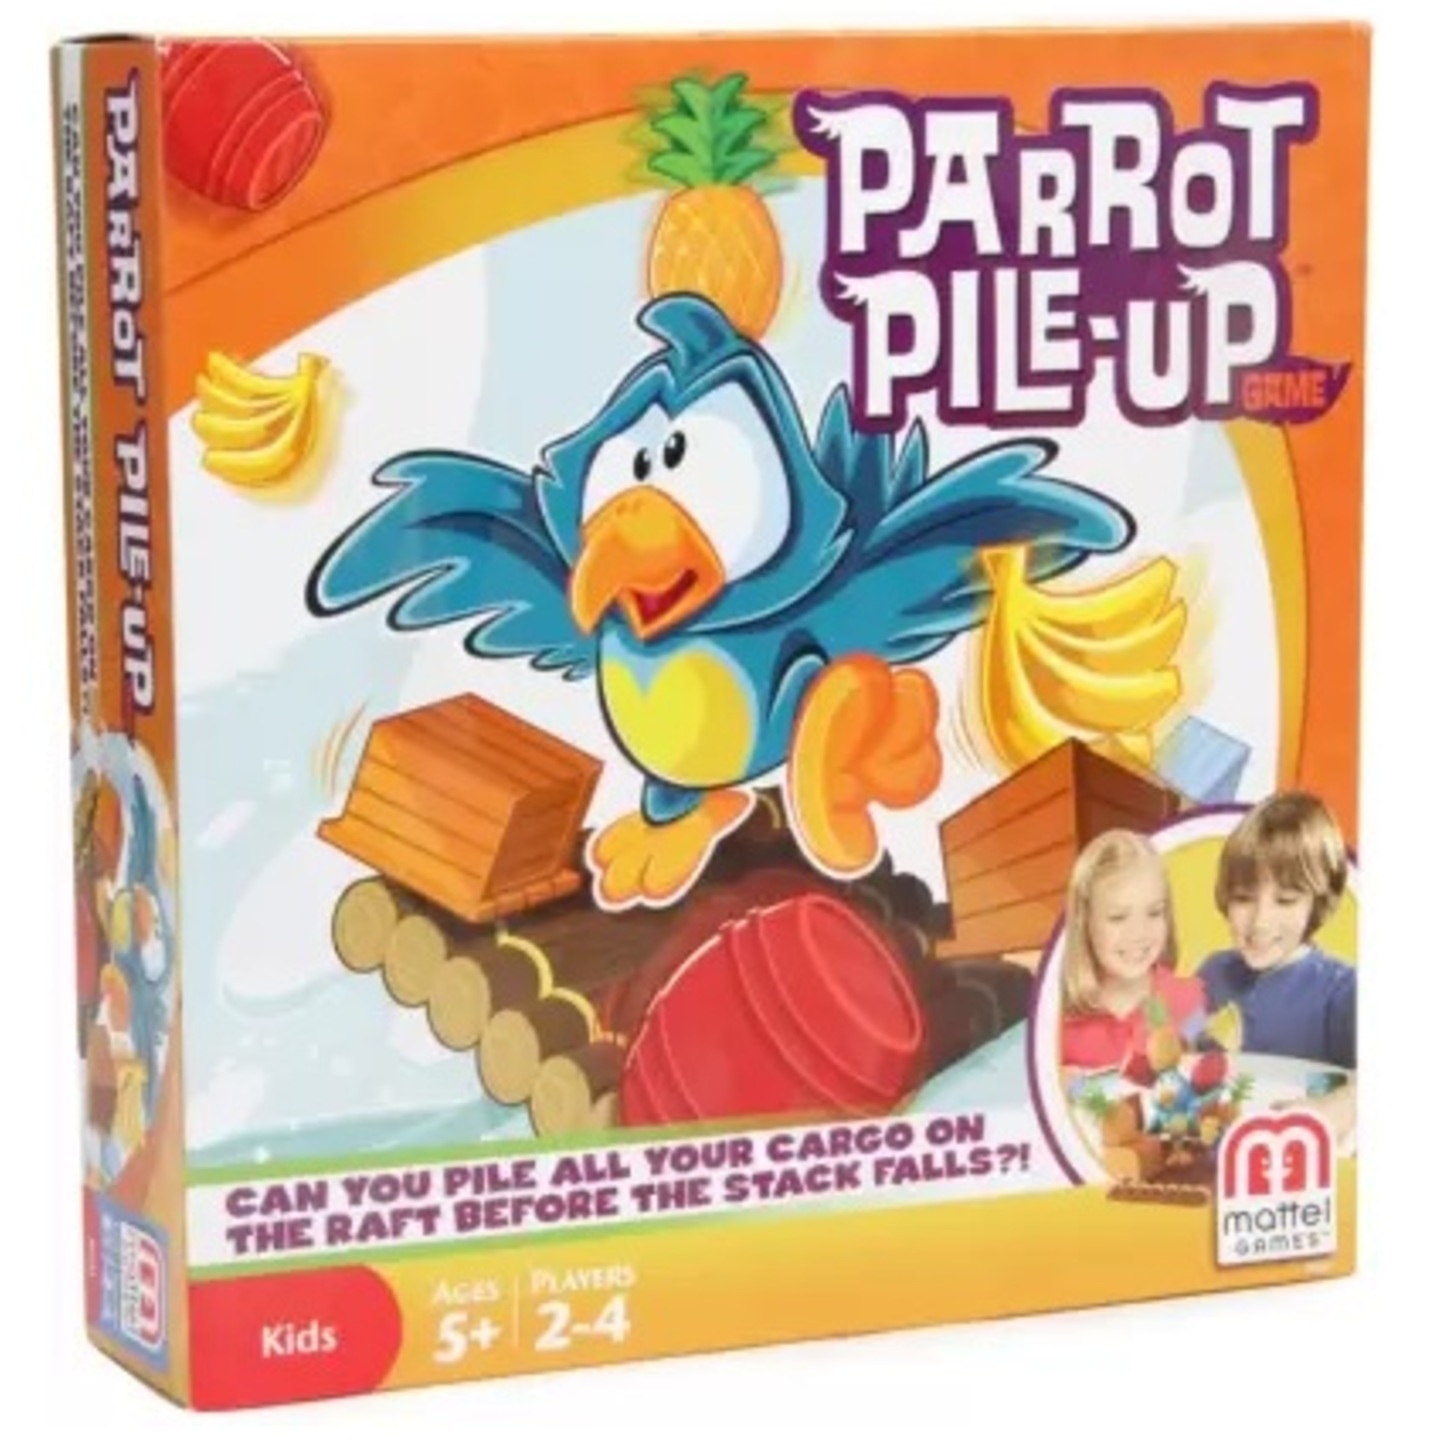 Mattel - Parrot Pile-Up Game (5 years+)